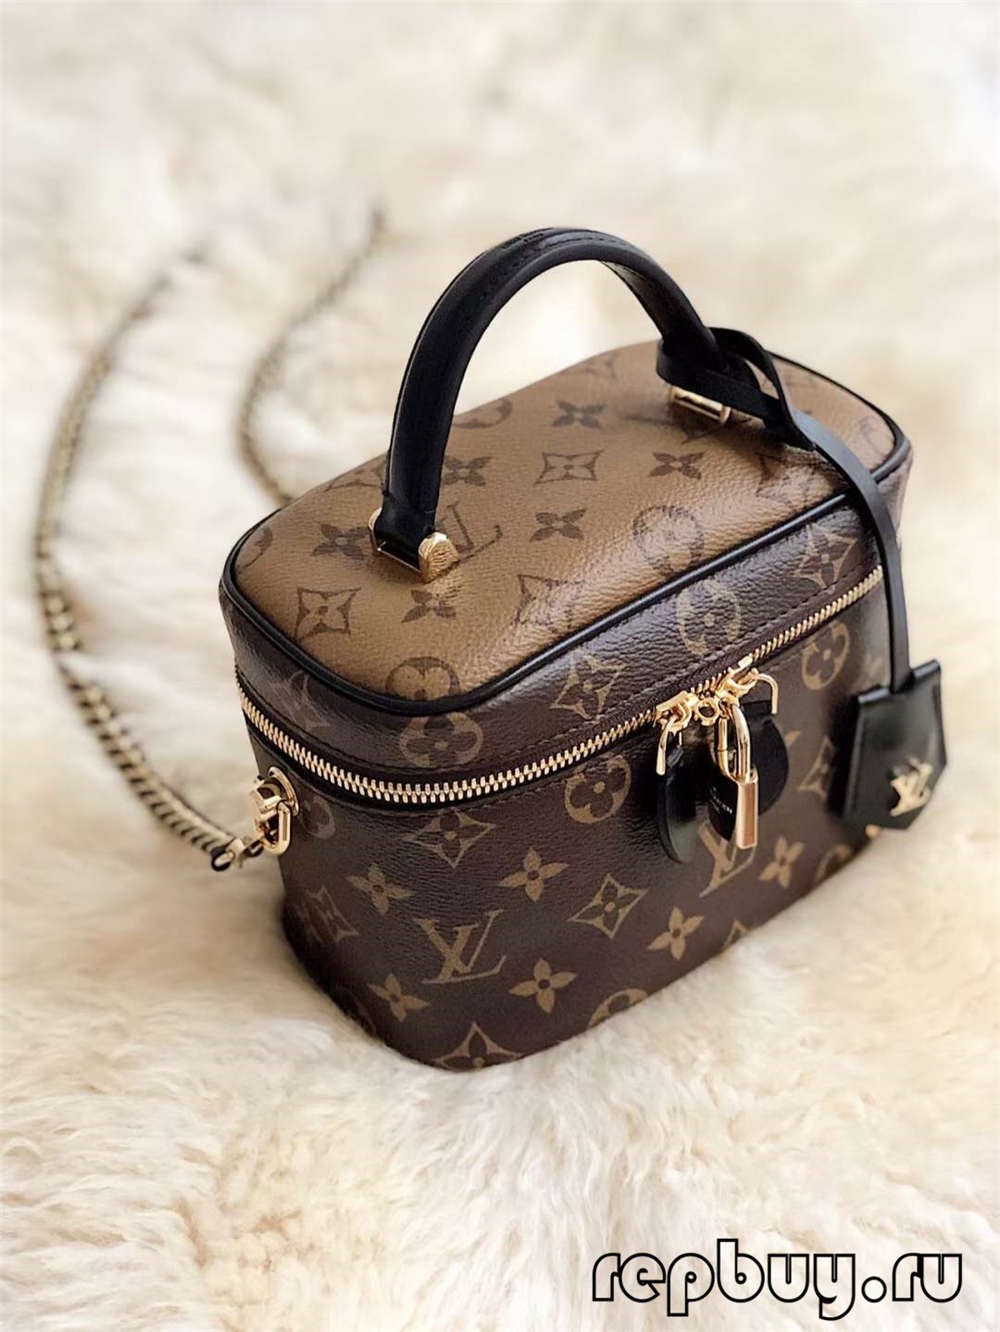 Louis Vuitton M45165 Vanity Small Top Replica Handbag Daily Use Effect (2022 Edition)-Best Quality Fake designer Bag Review, Replica designer bag ru